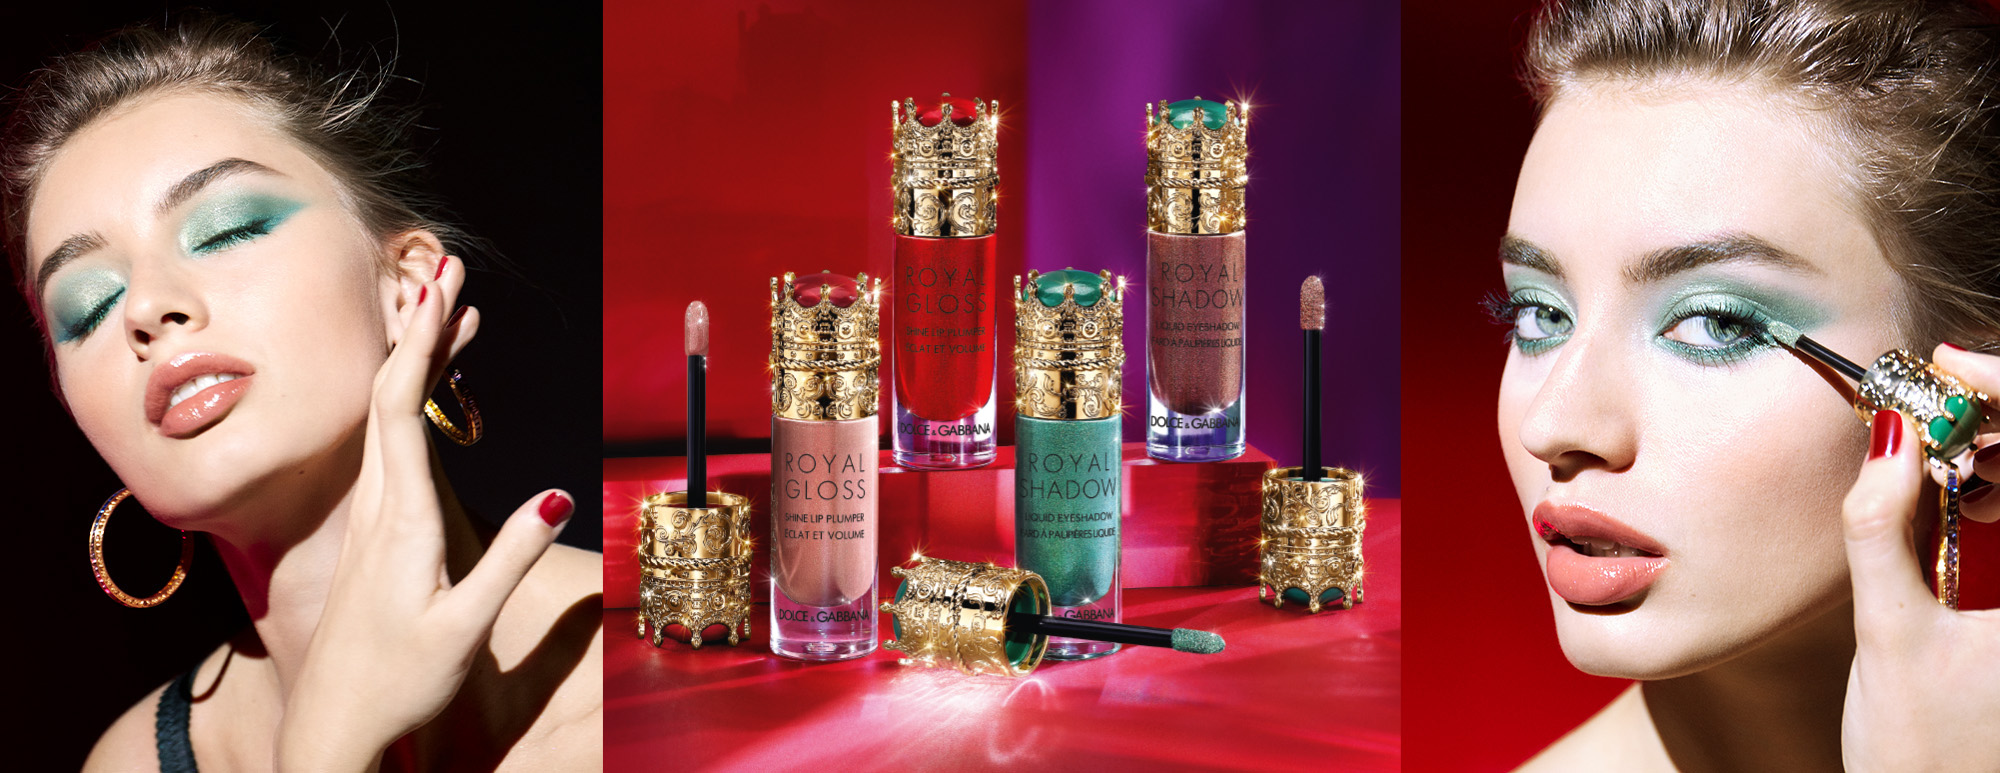 The Holiday Makeup from Dolce & Gabbana includes four shimmering royal shades perfect for a queen